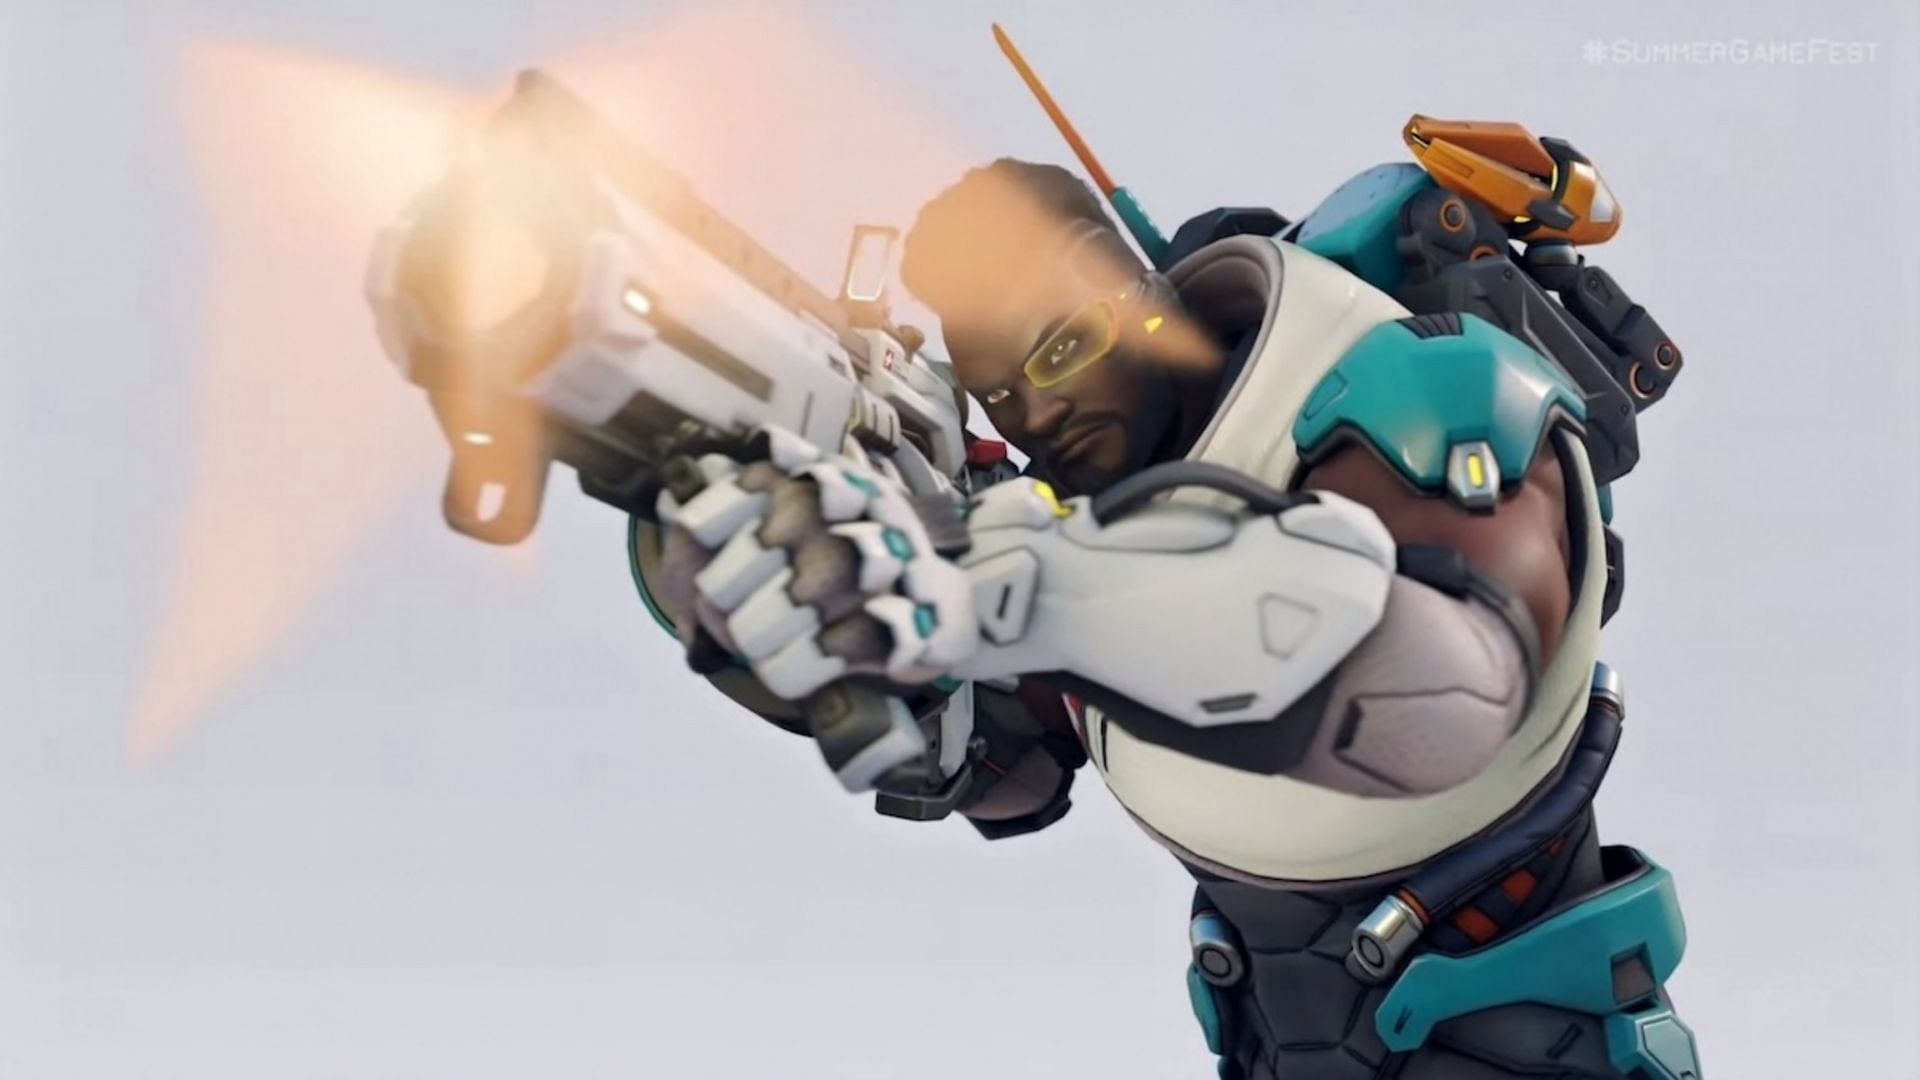 Baptiste with his new design in Overwatch 2 (Image via Blizzard)